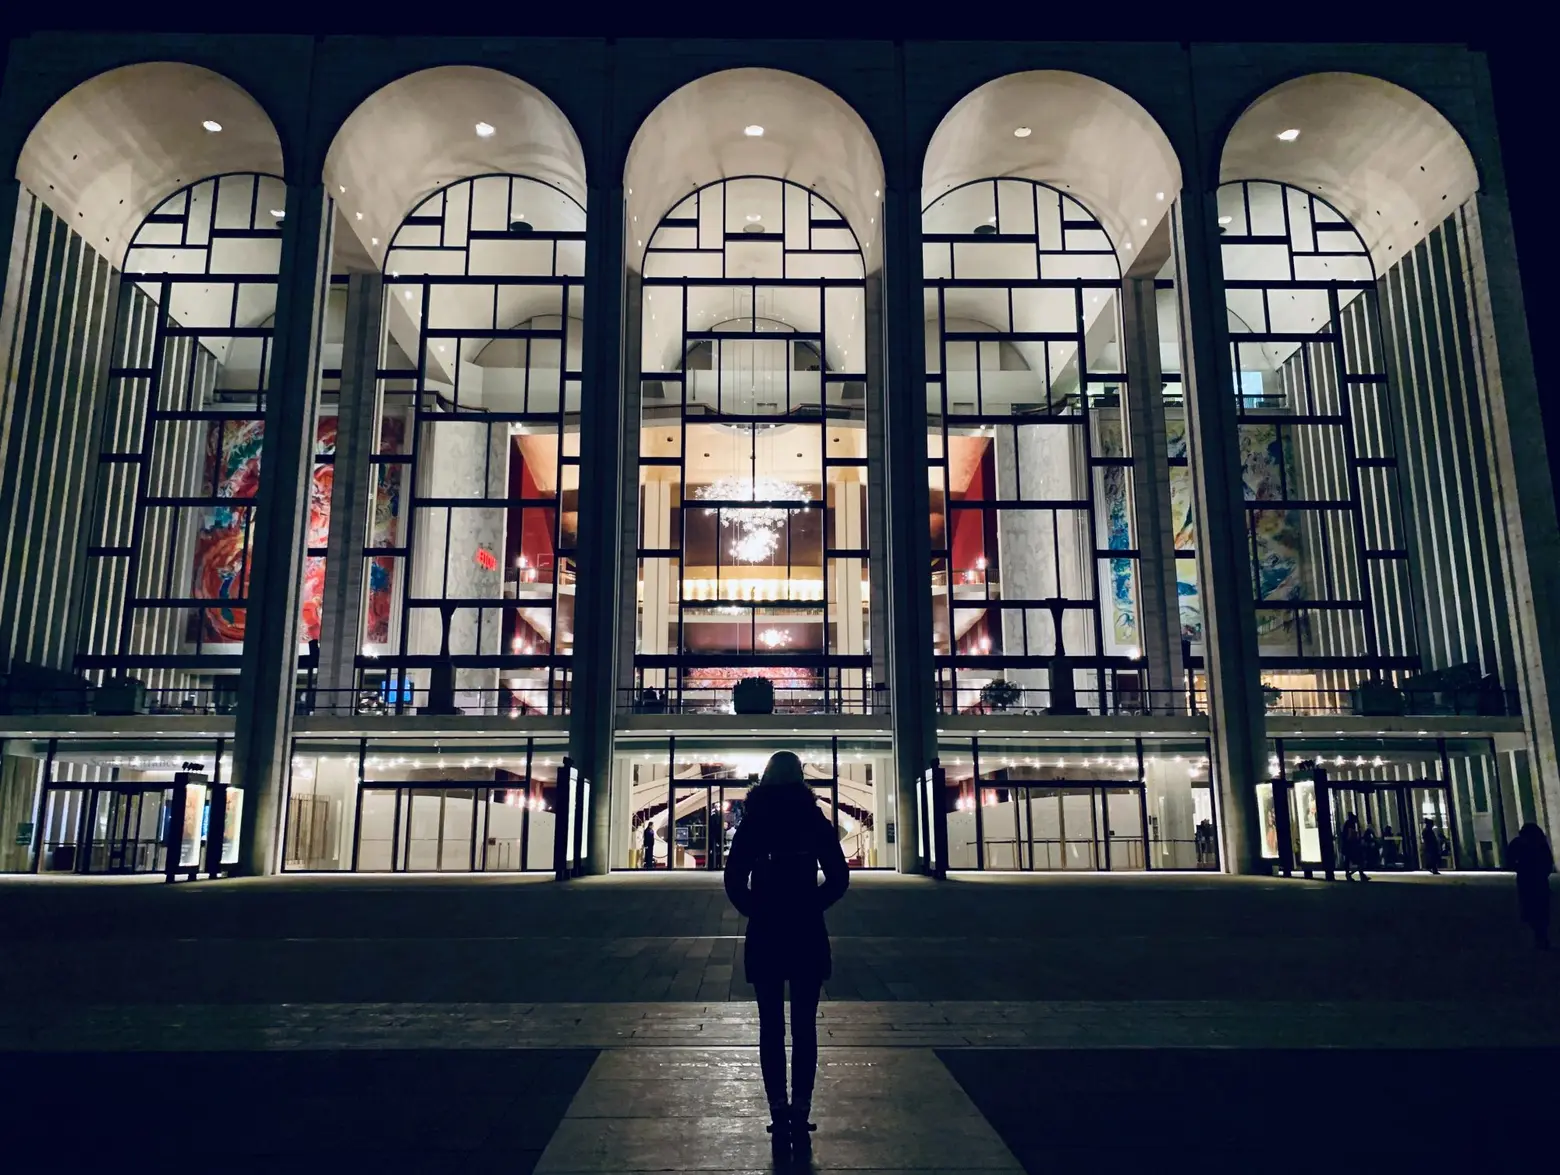 The Met Opera will not resume performances until New Year’s Eve